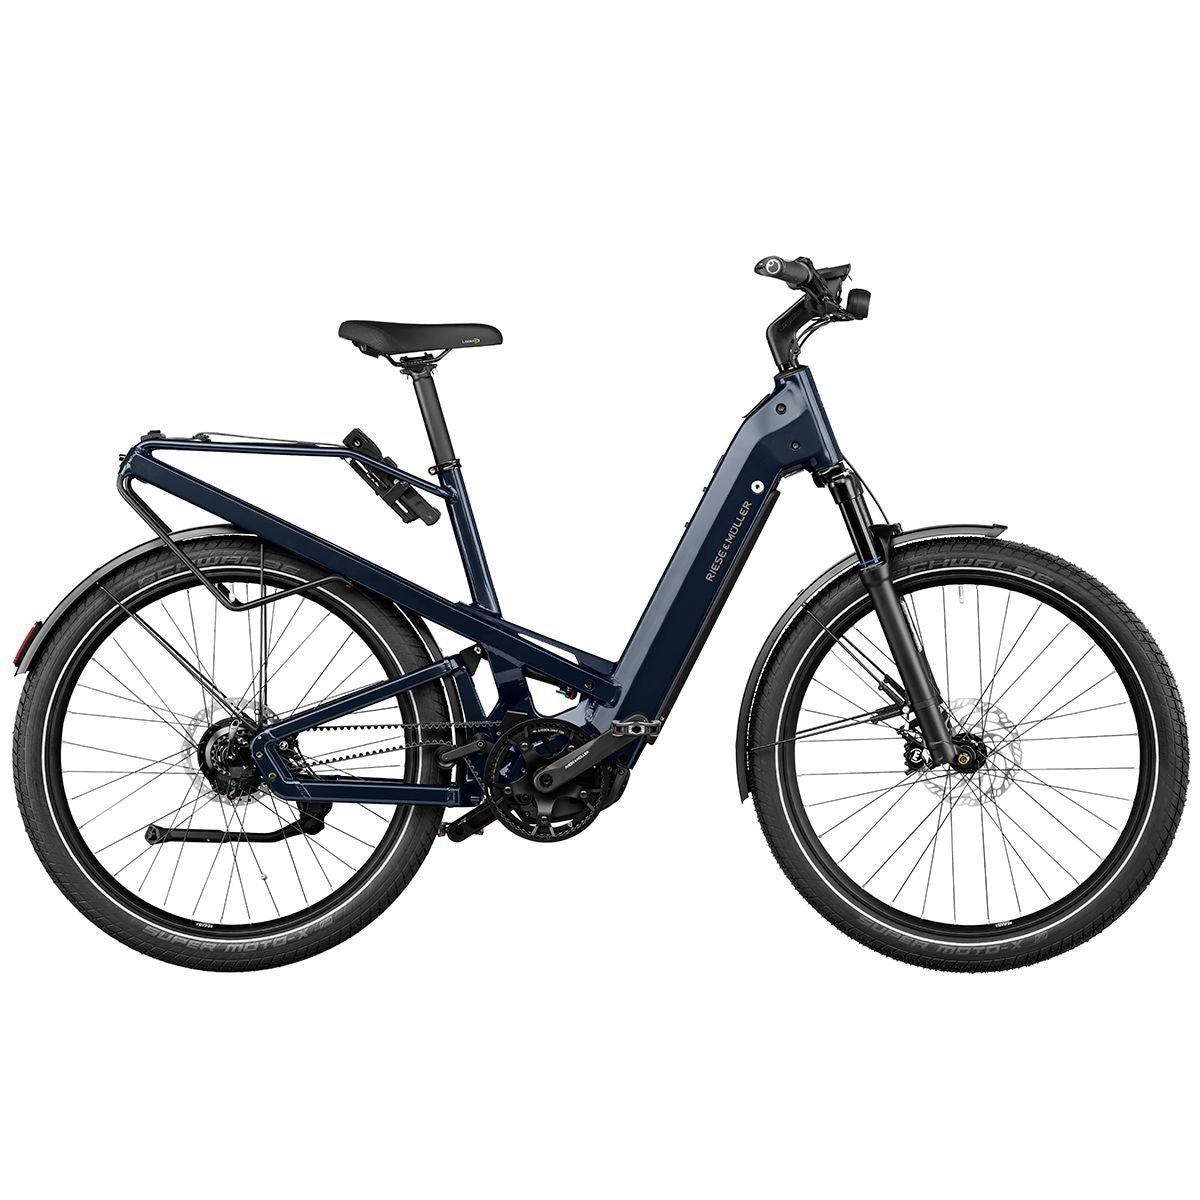 Riese & Muller Homage GT Rohloff HS - Deepsea blue 54cm IN STOCK!